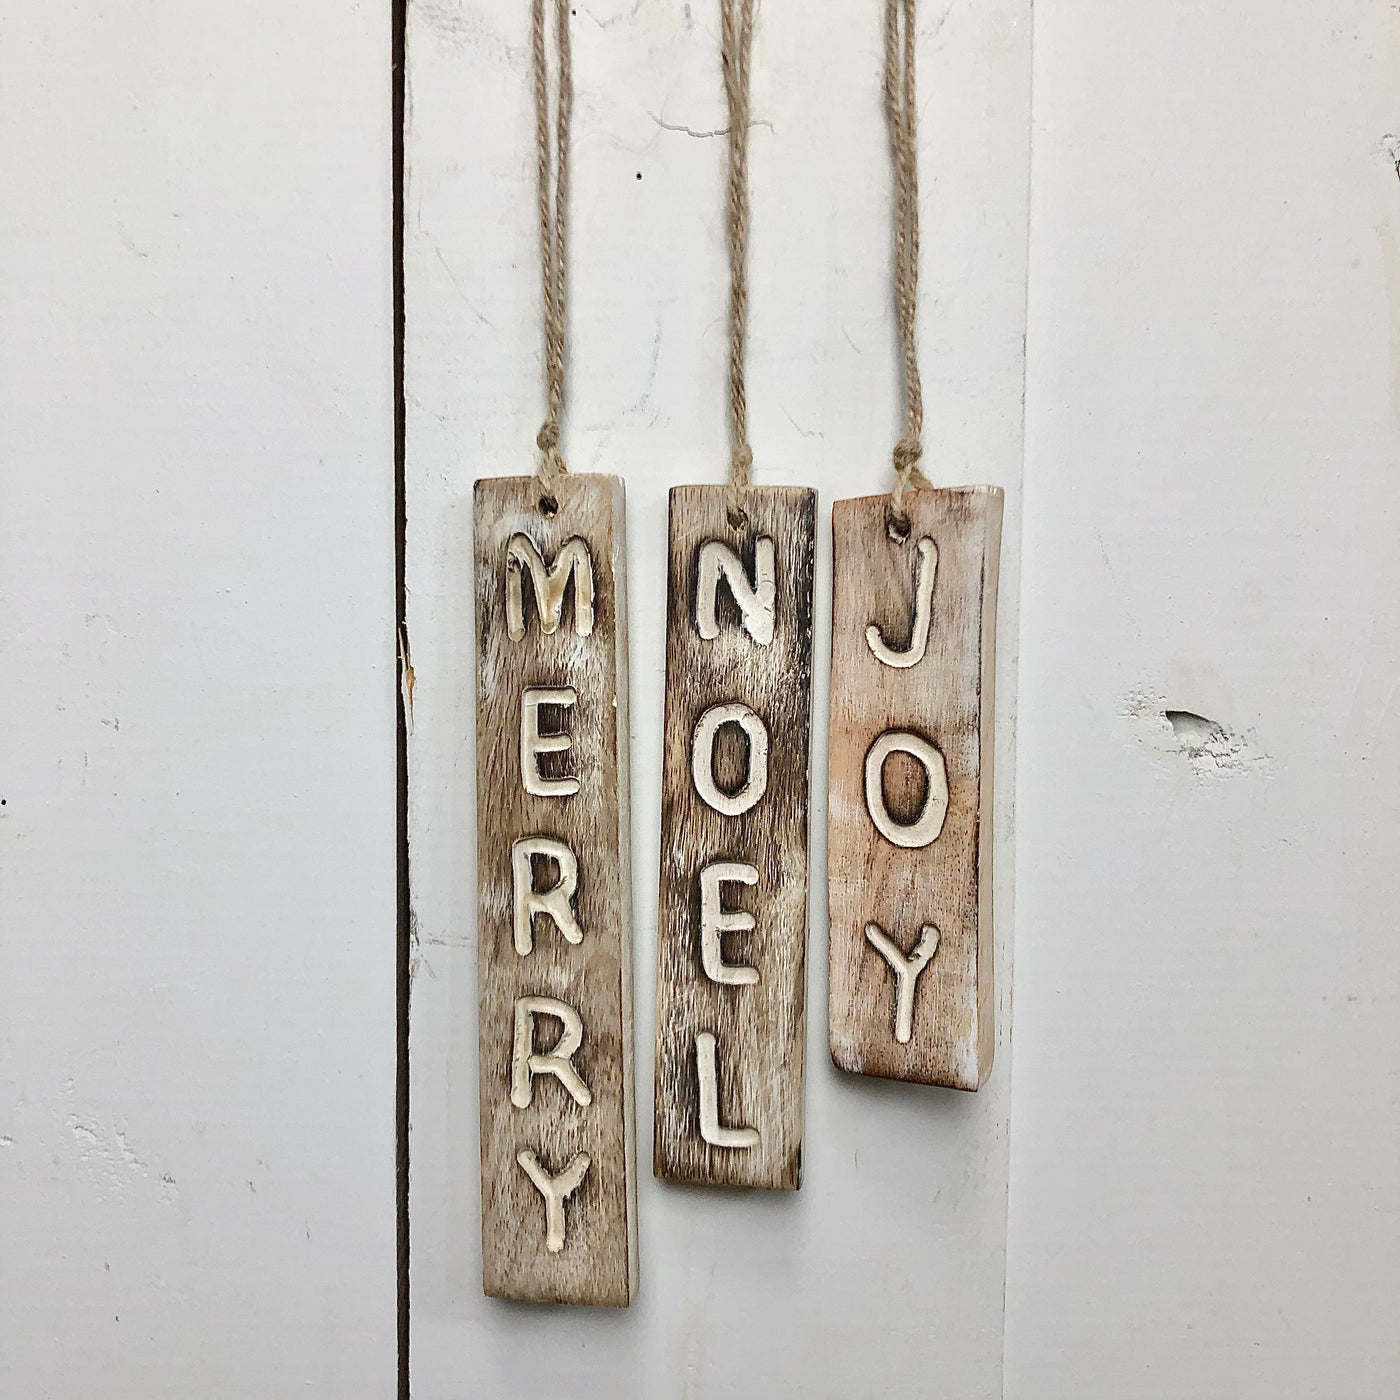 Wooden Distressed Holiday Ornaments